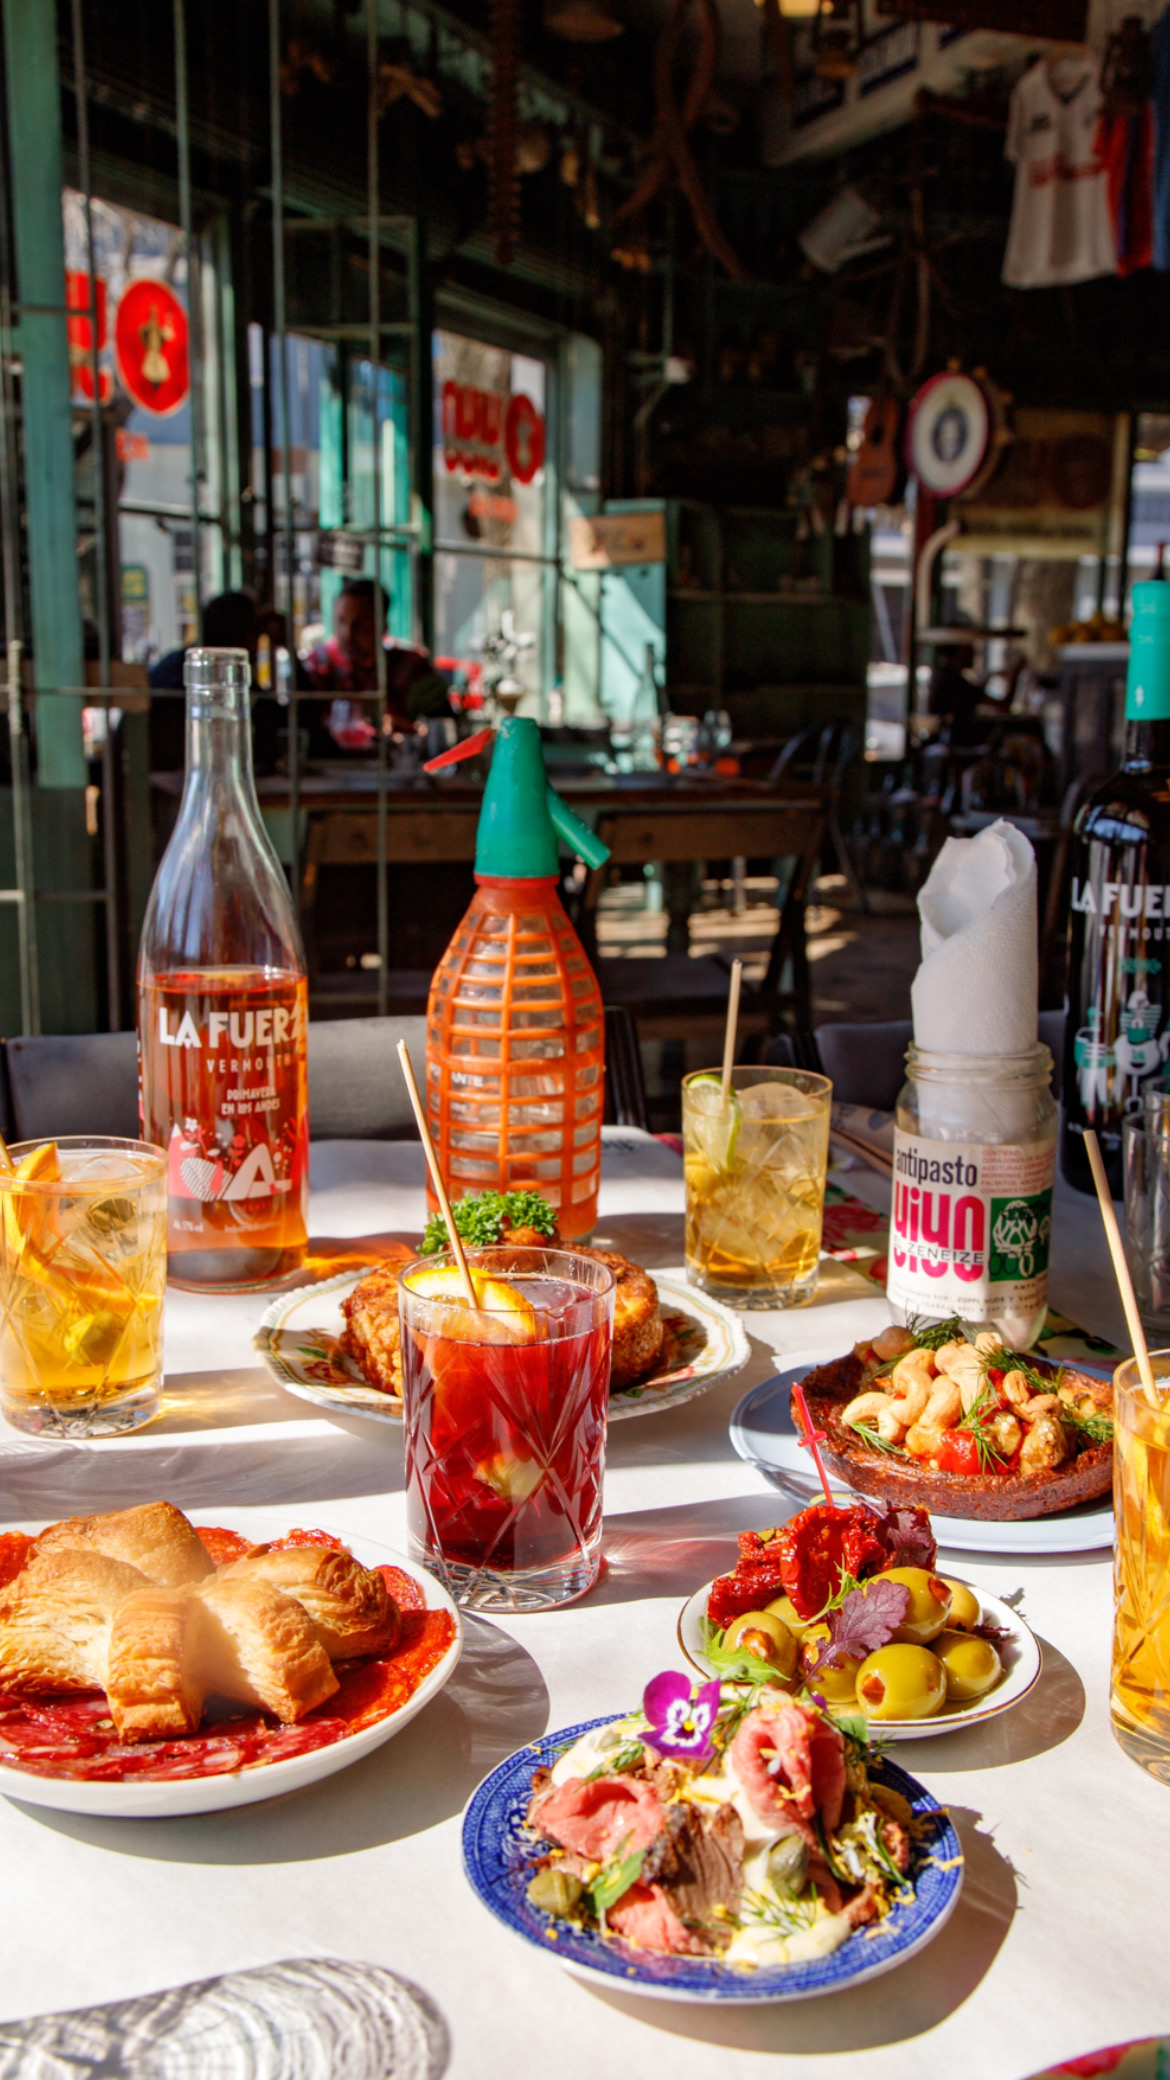 A table filled with bright colorful dishes, a red cocktail, bottles of aged amaro and seltzer